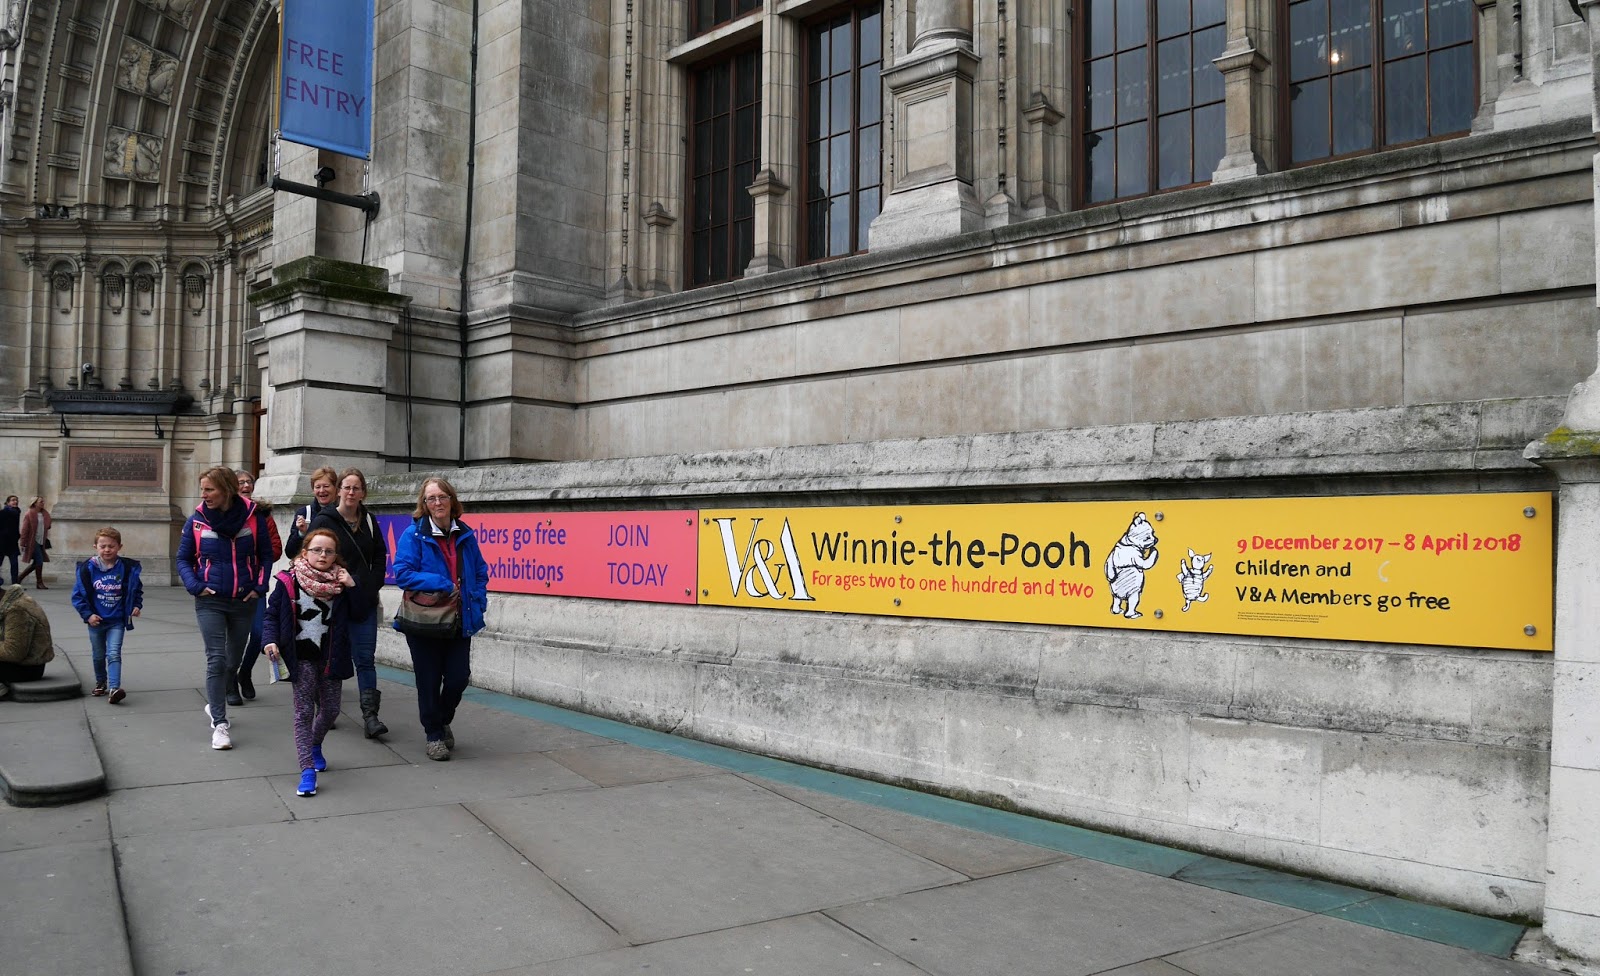 The Winnie the Pooh: Exploring a Classic exhibition sign outside the Victoria and Albert Museum